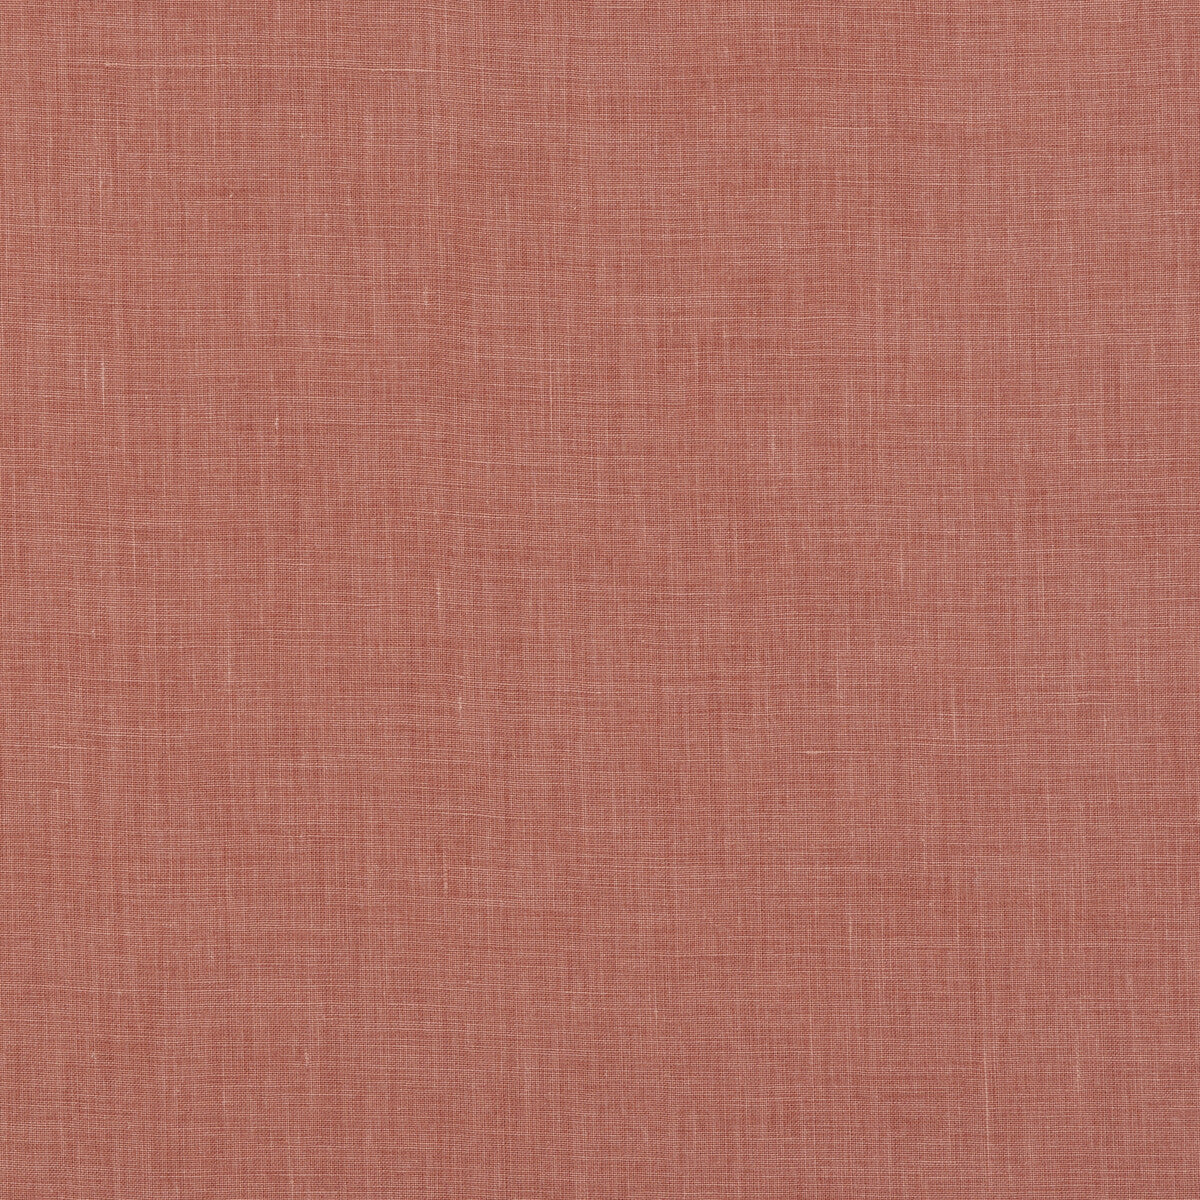 Kravet Basics fabric in 33767-12 color - pattern 33767.12.0 - by Kravet Basics in the Perfect Plains collection